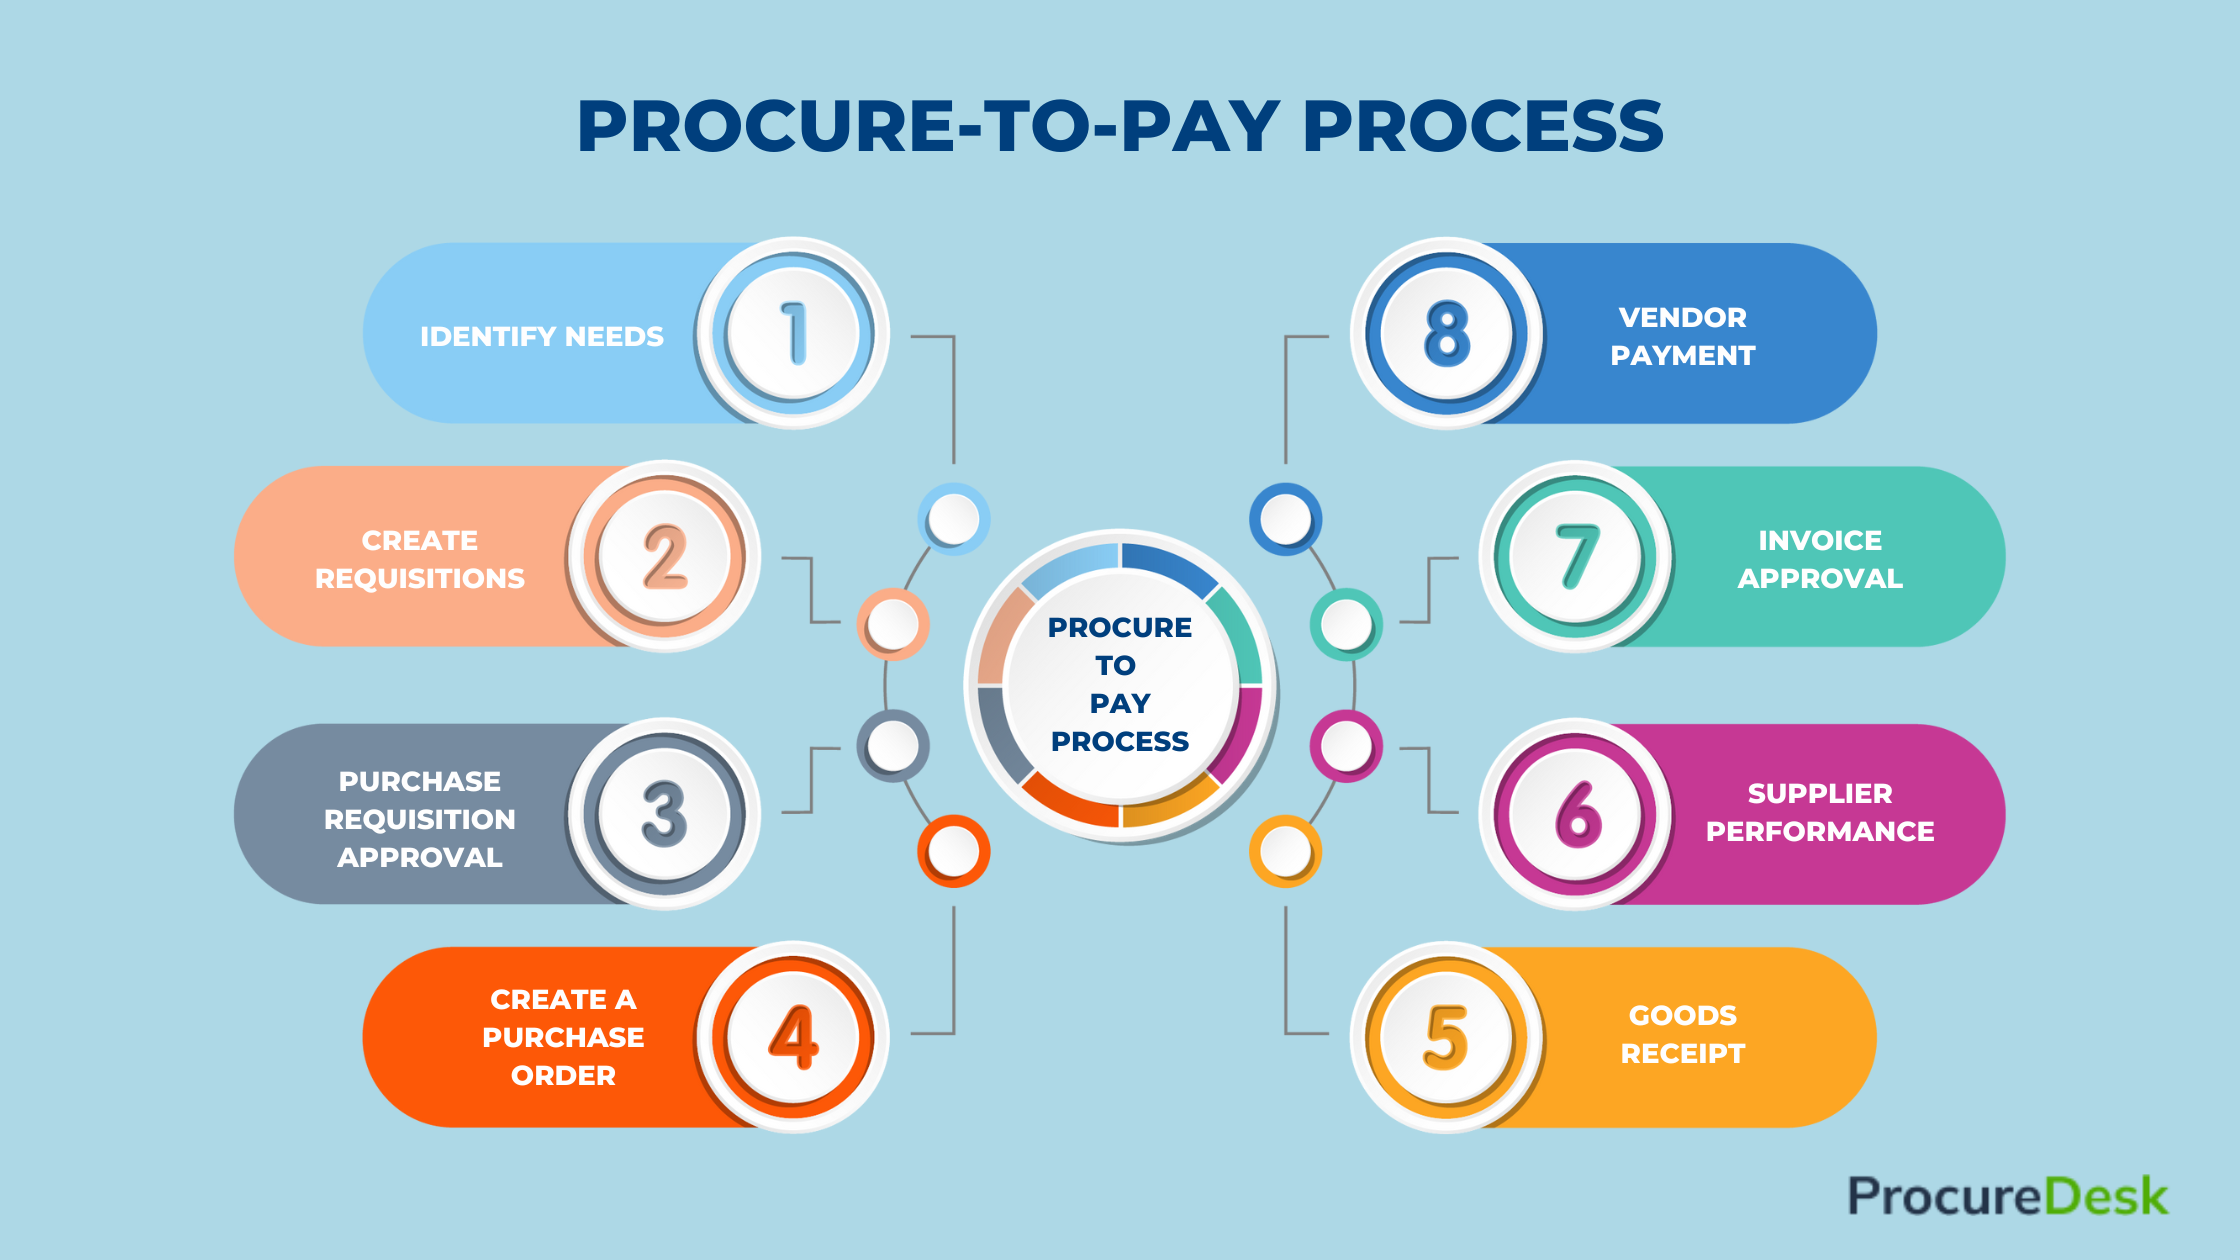 procure-to-pay automation